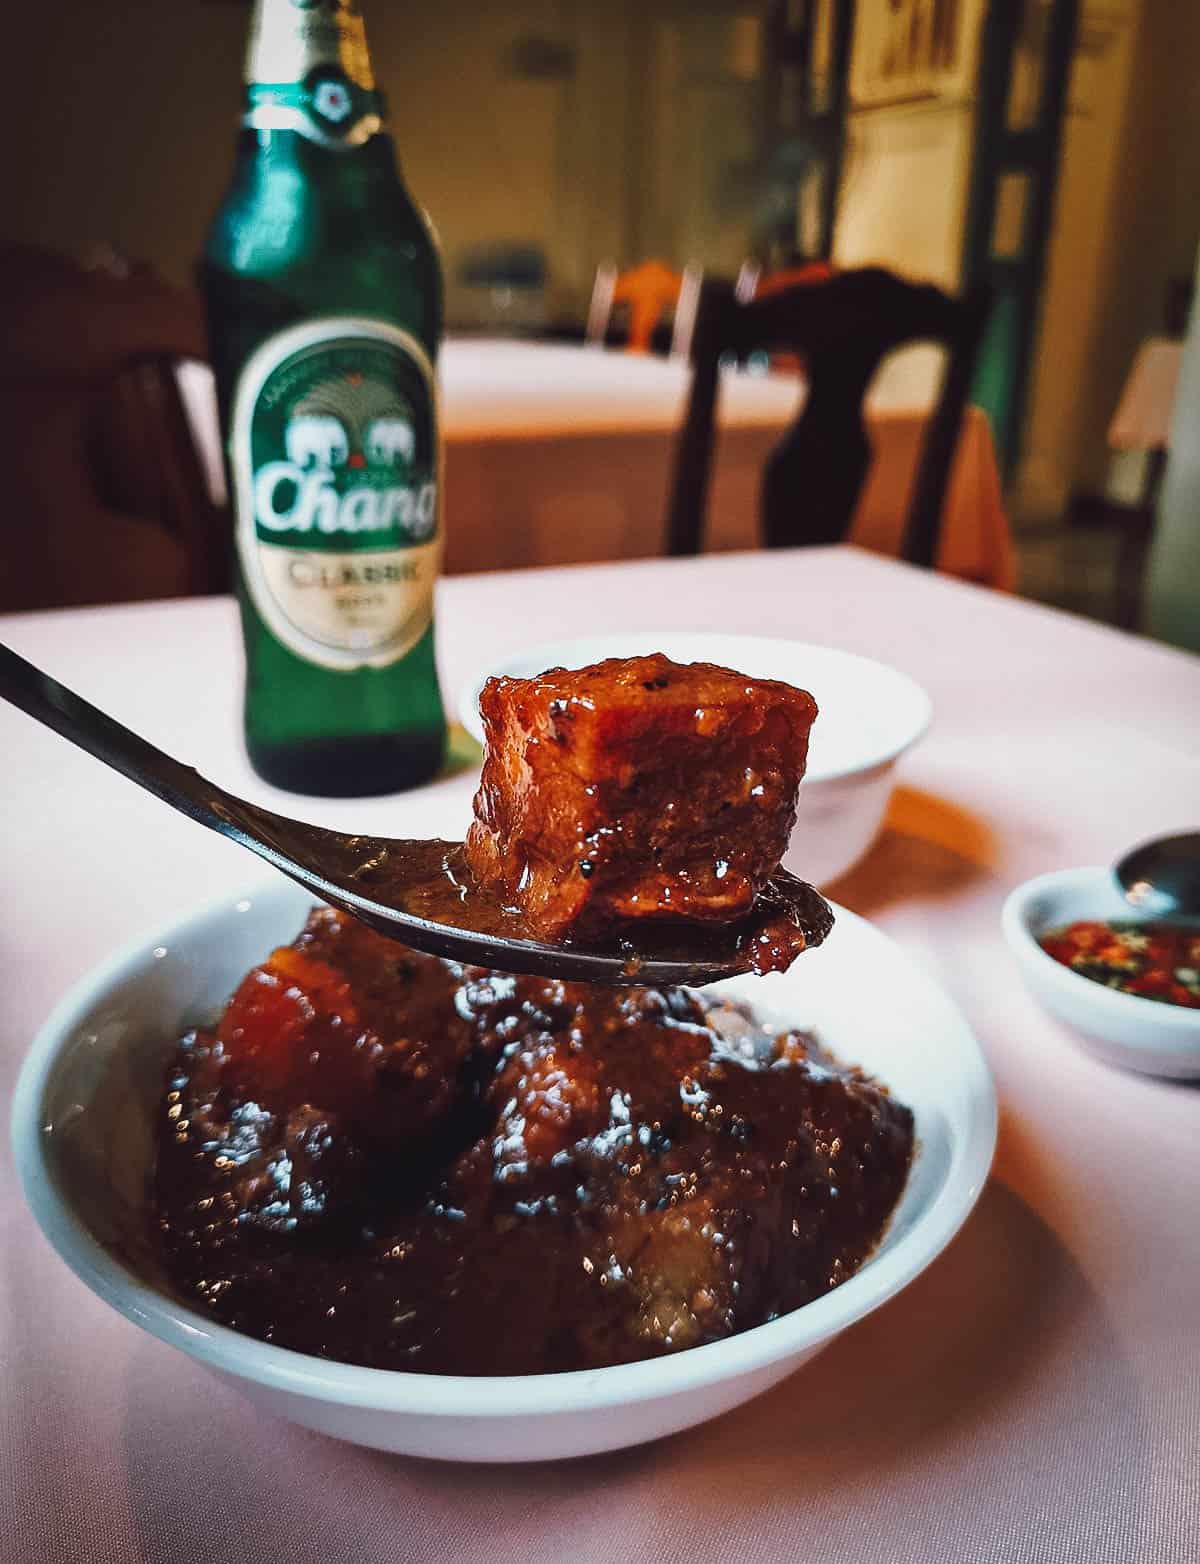 Moo hong or slow-cooked pork belly stew